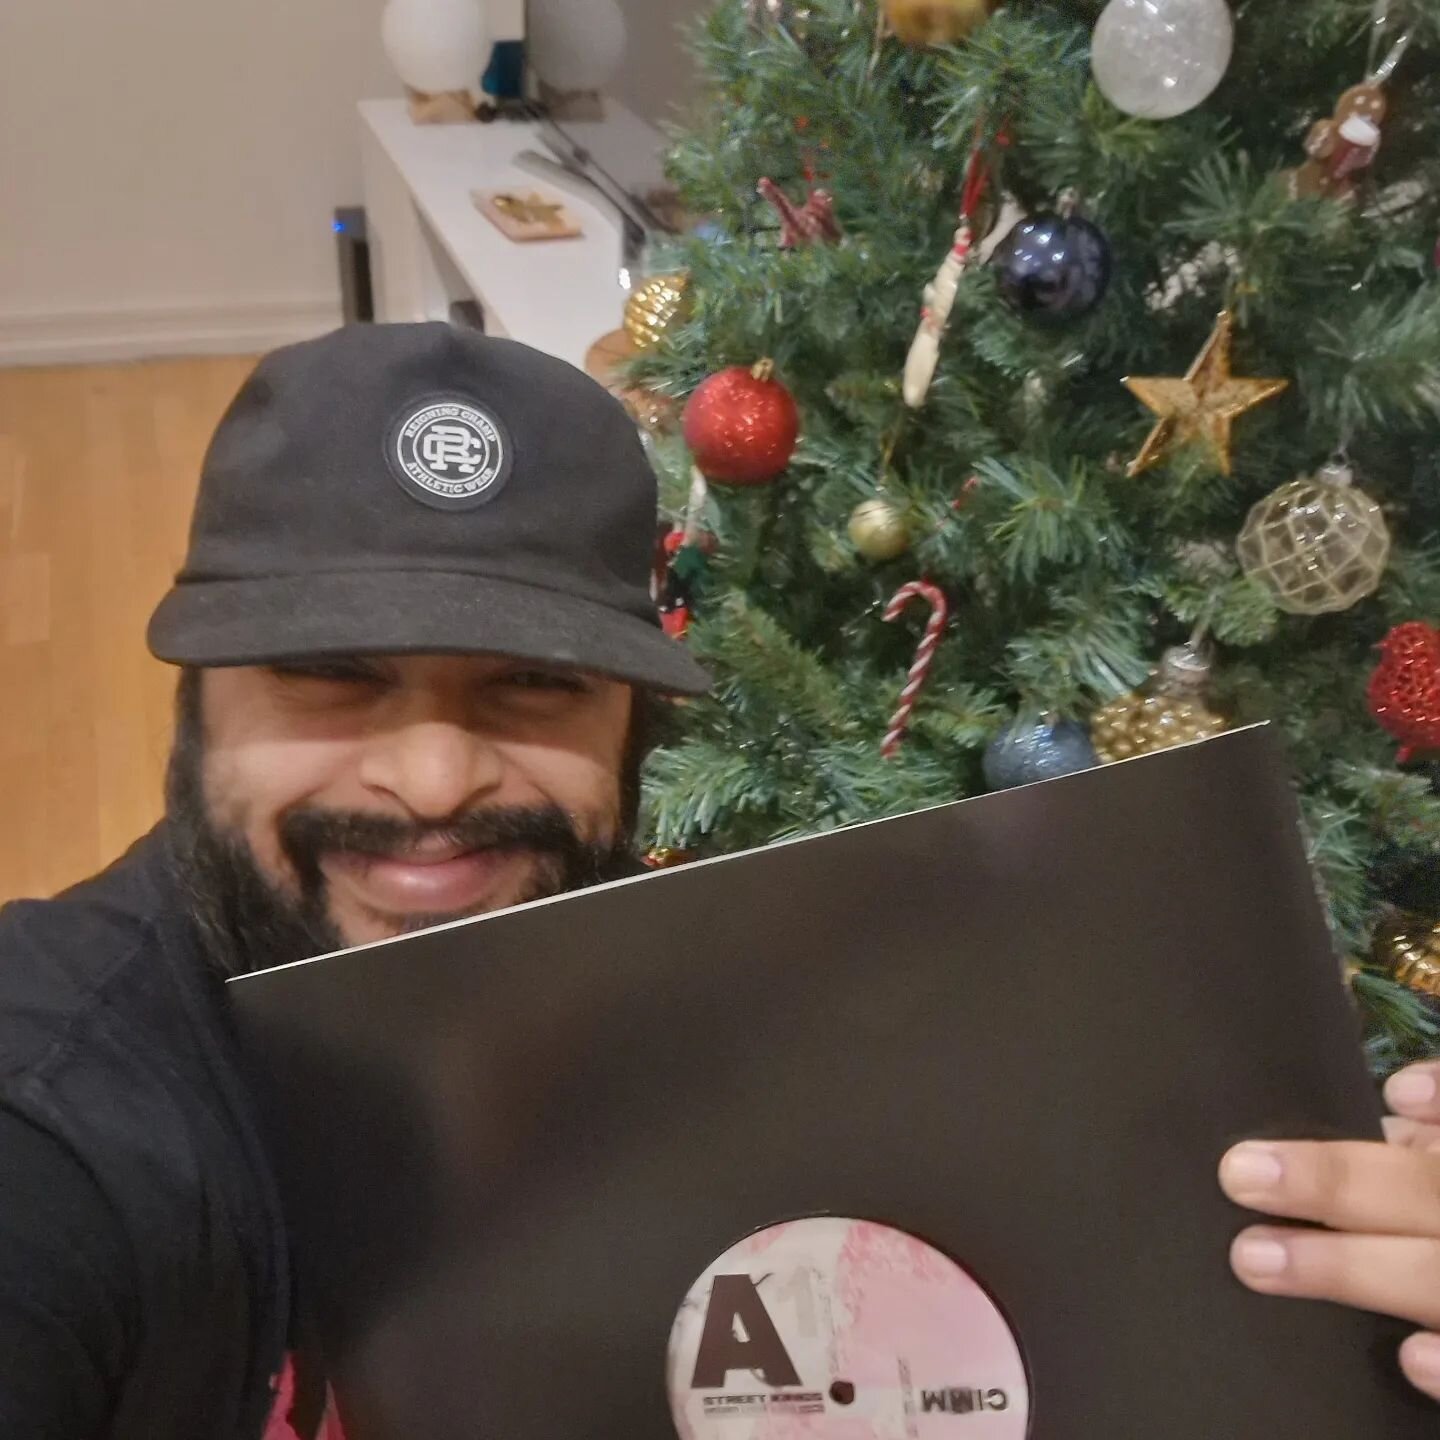 Easyyyyyy you bunch of legends. 🎄🎄🎄

Just here to let you know that 'Street Kings / Day 1 / It's Alright' are now fully released and available to cop and your favourite music retailers!

Big up @kaizenltd &amp; @djmadamx for the support and releas